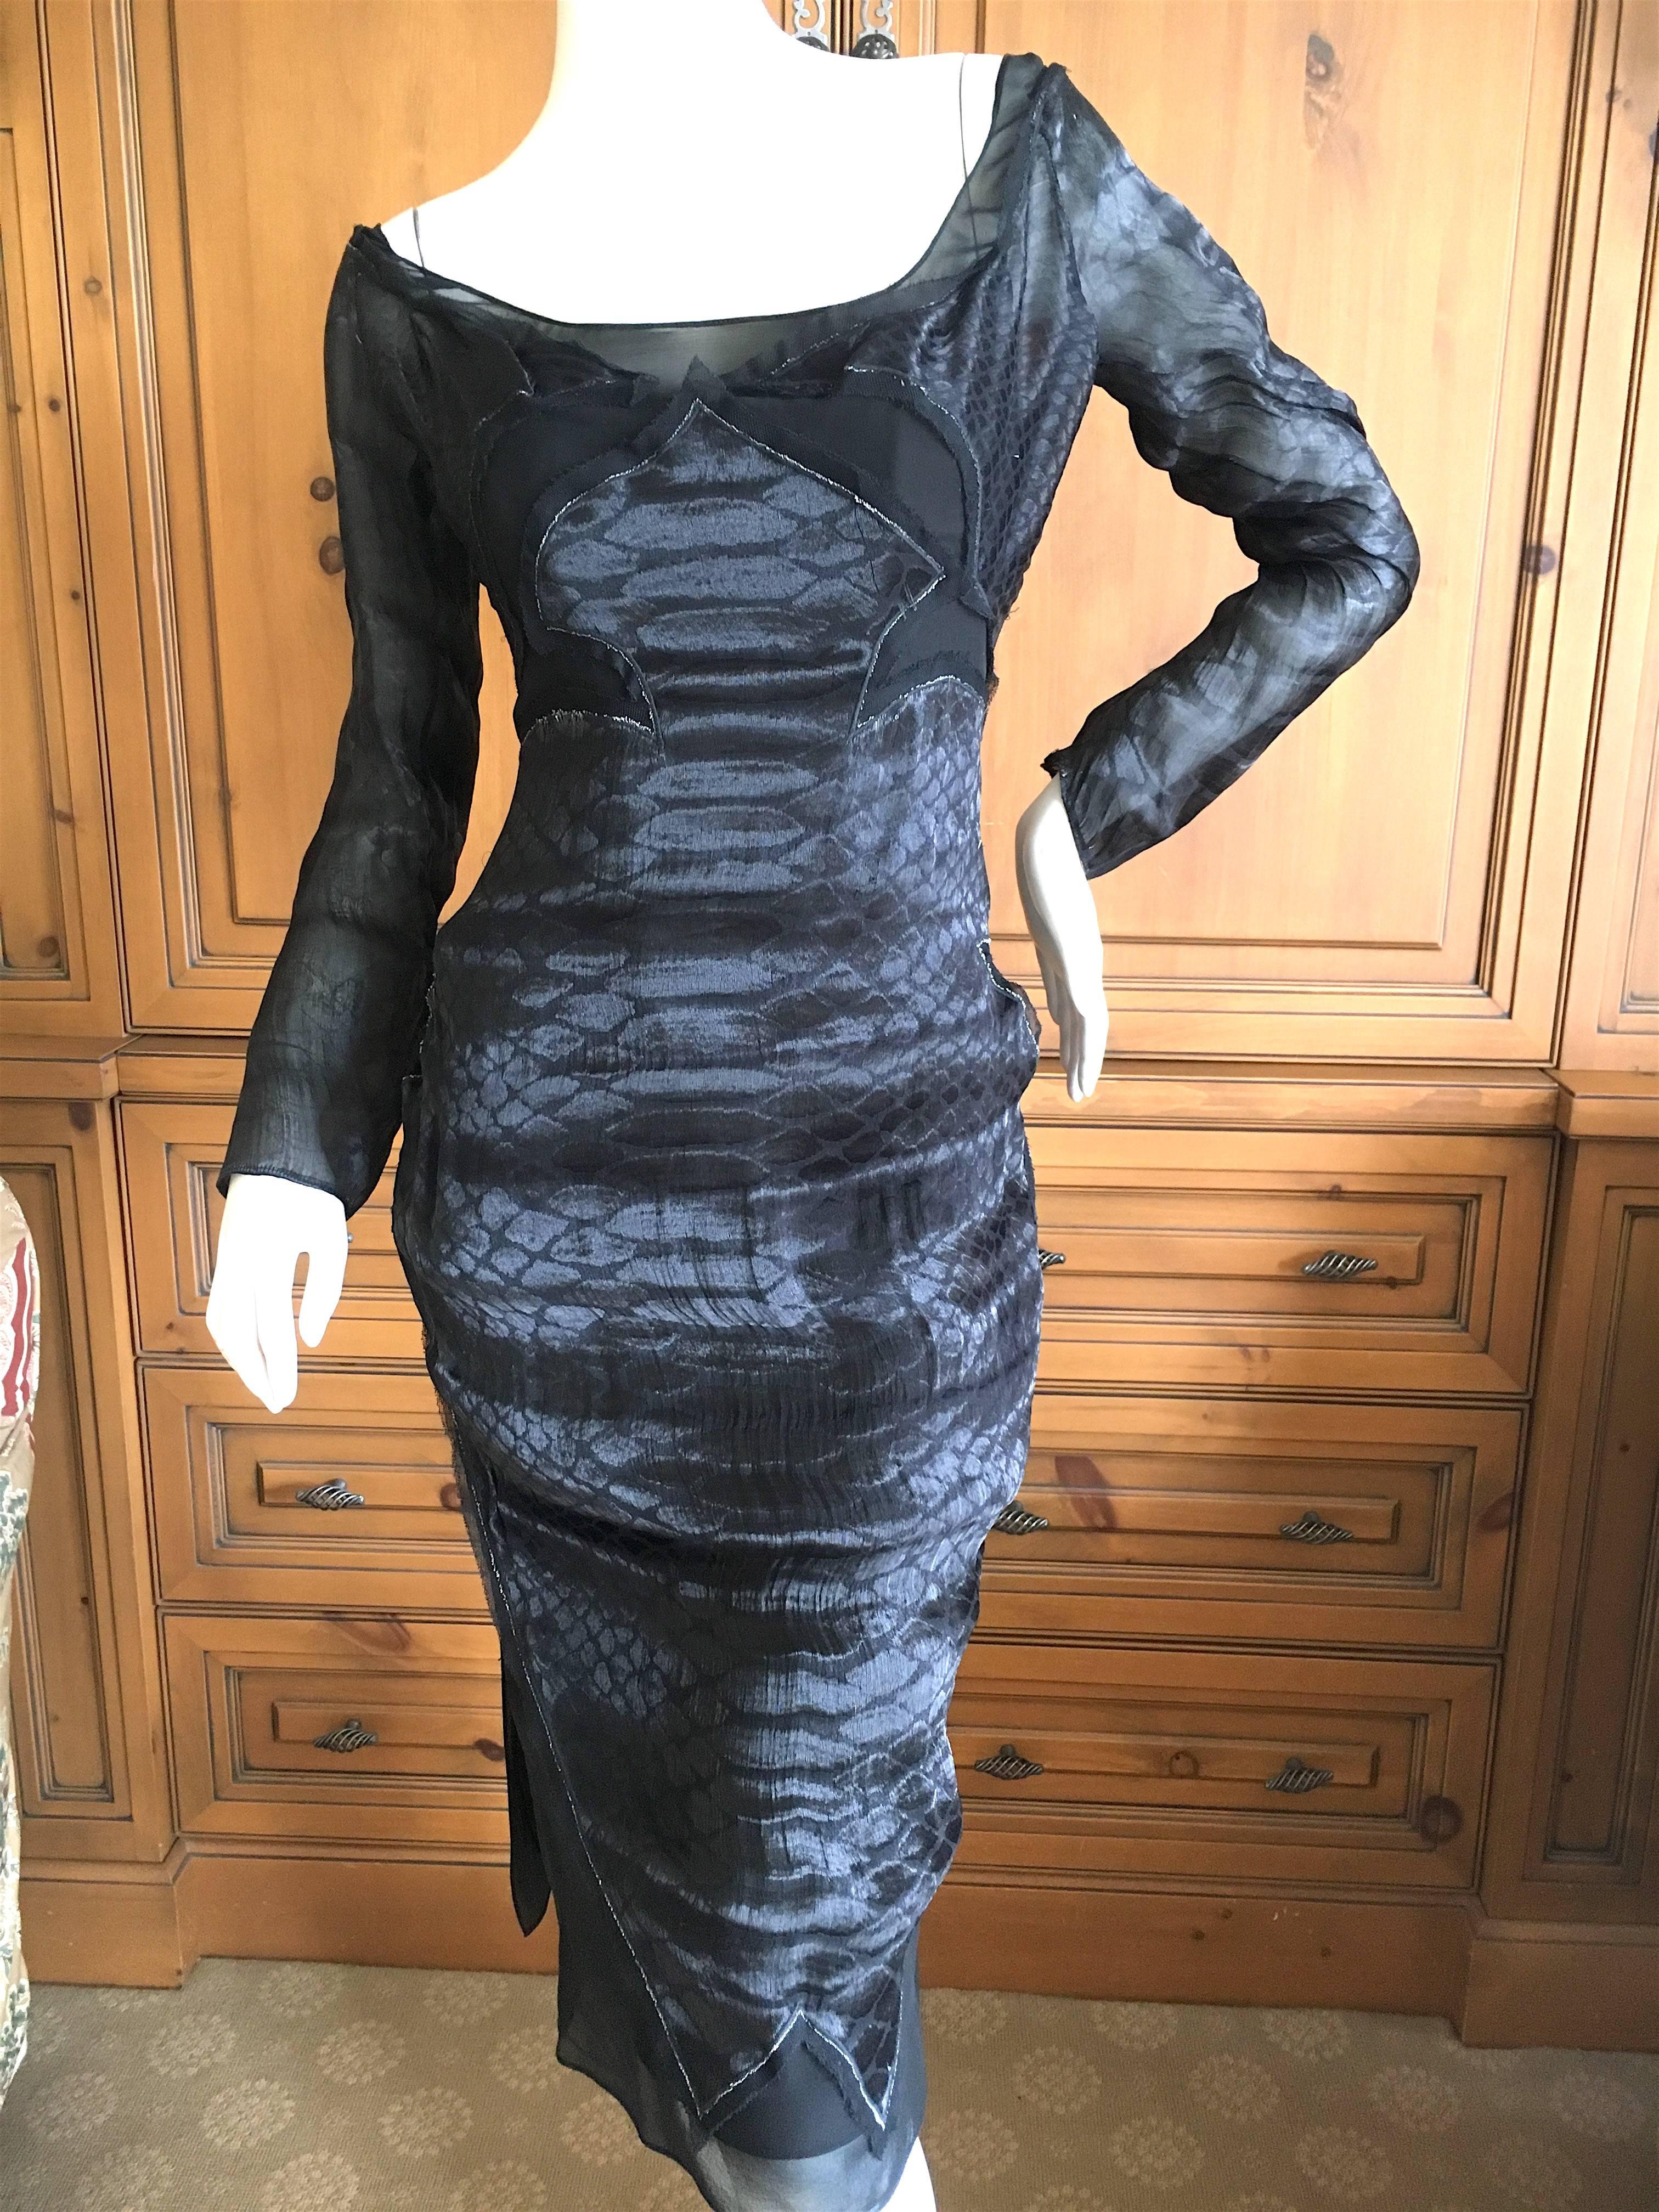 Women's Yves Saint Laurent by Tom Ford Reptile Print Black Dress Fall 2004 For Sale